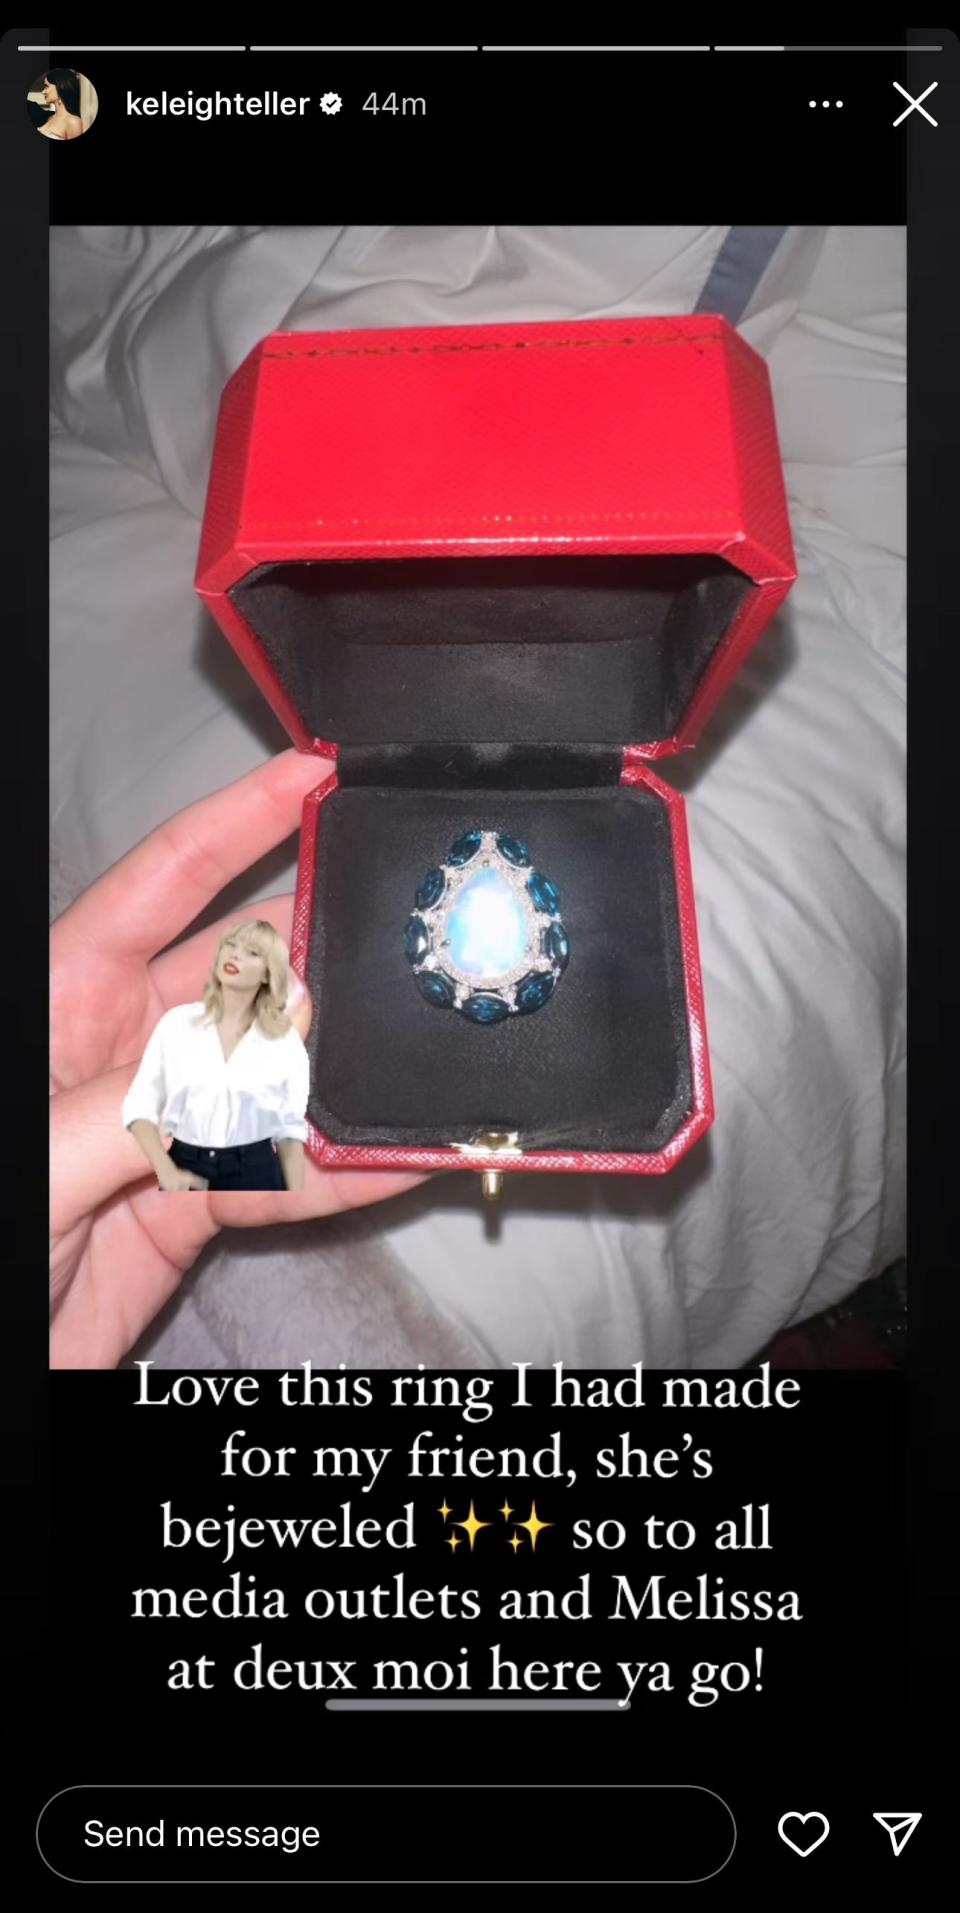 A screenshot of Keleigh Teller's Instagram story about Taylor Swift's birthday ring.